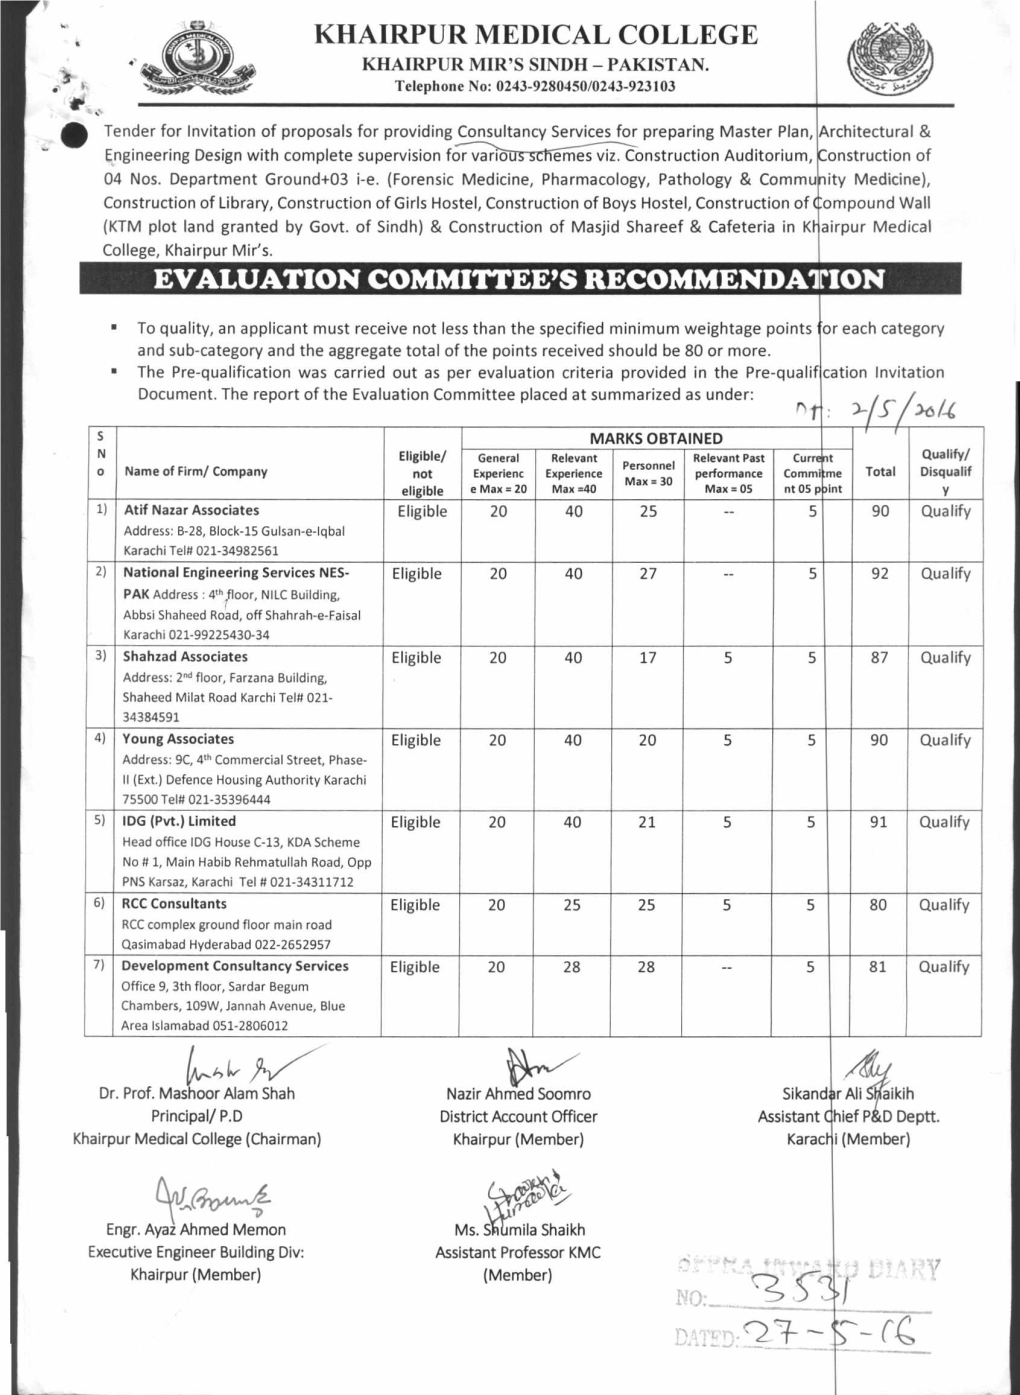 Khairpur Medical College Evaluation